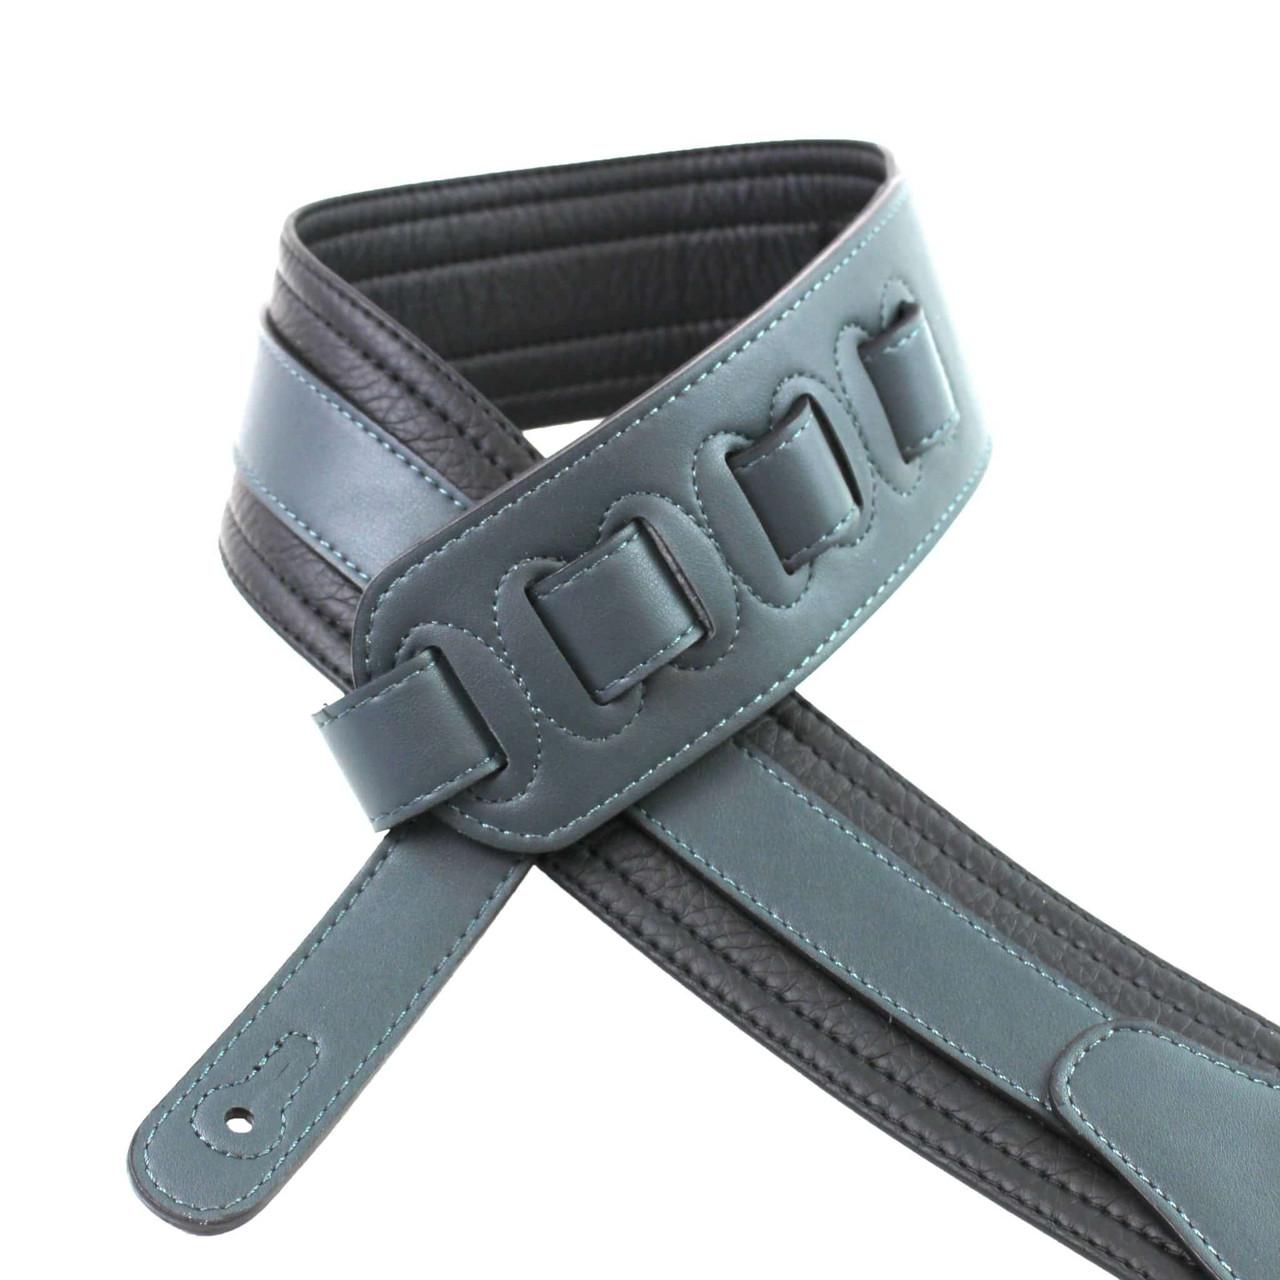 Teal Grey Multi Layer Strap with Padded Glove Leather Back